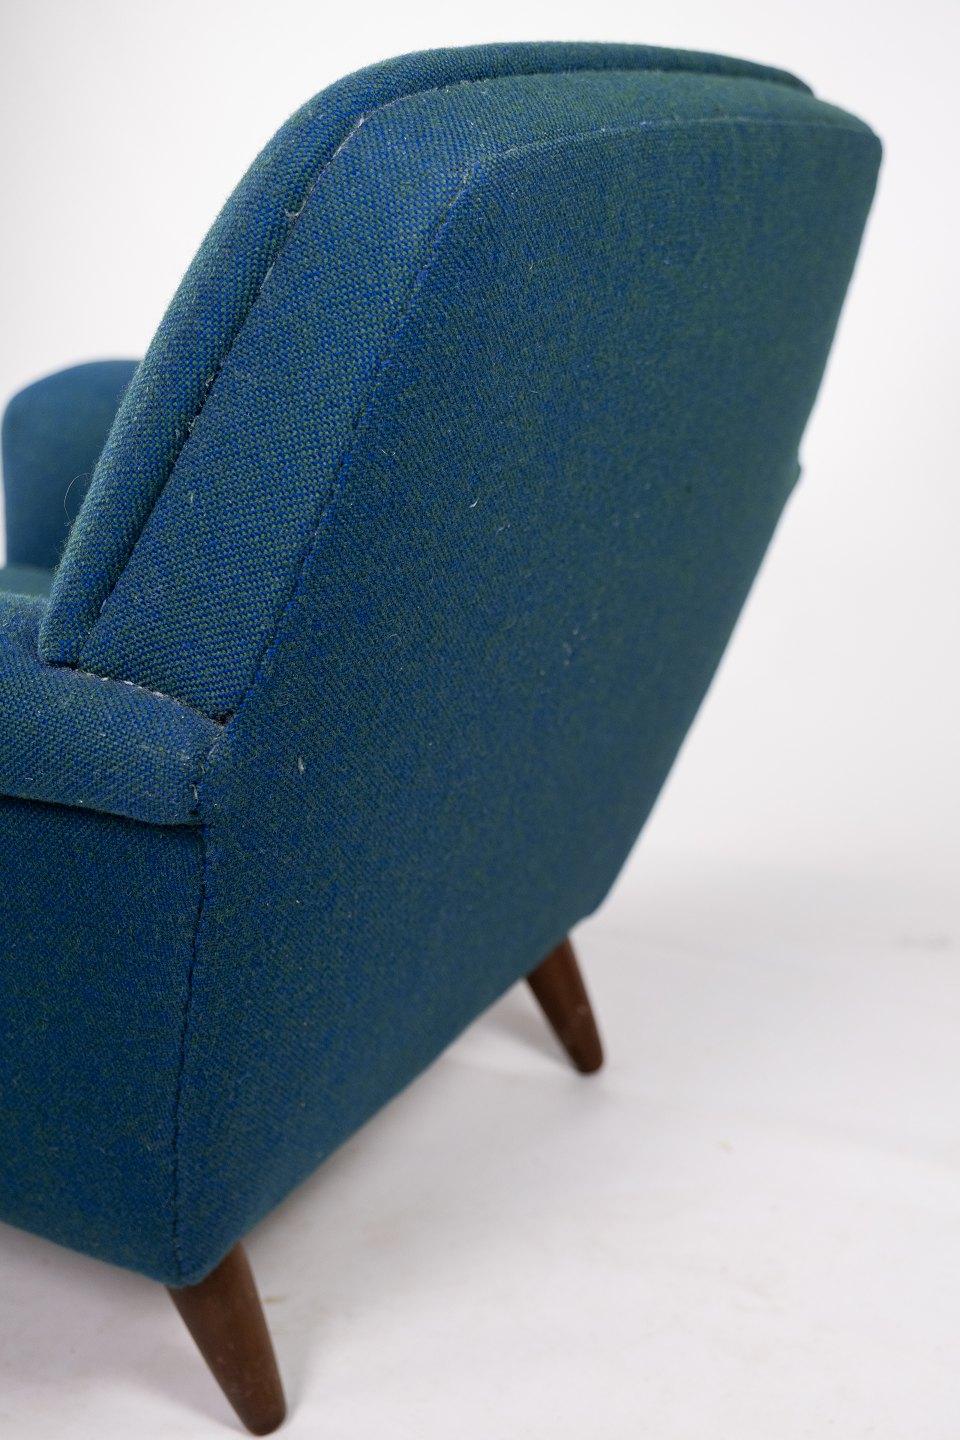 Armchair Upholstered with Dark Blue Wool Fabric and Legs in Dark Wood, 1960s For Sale 1